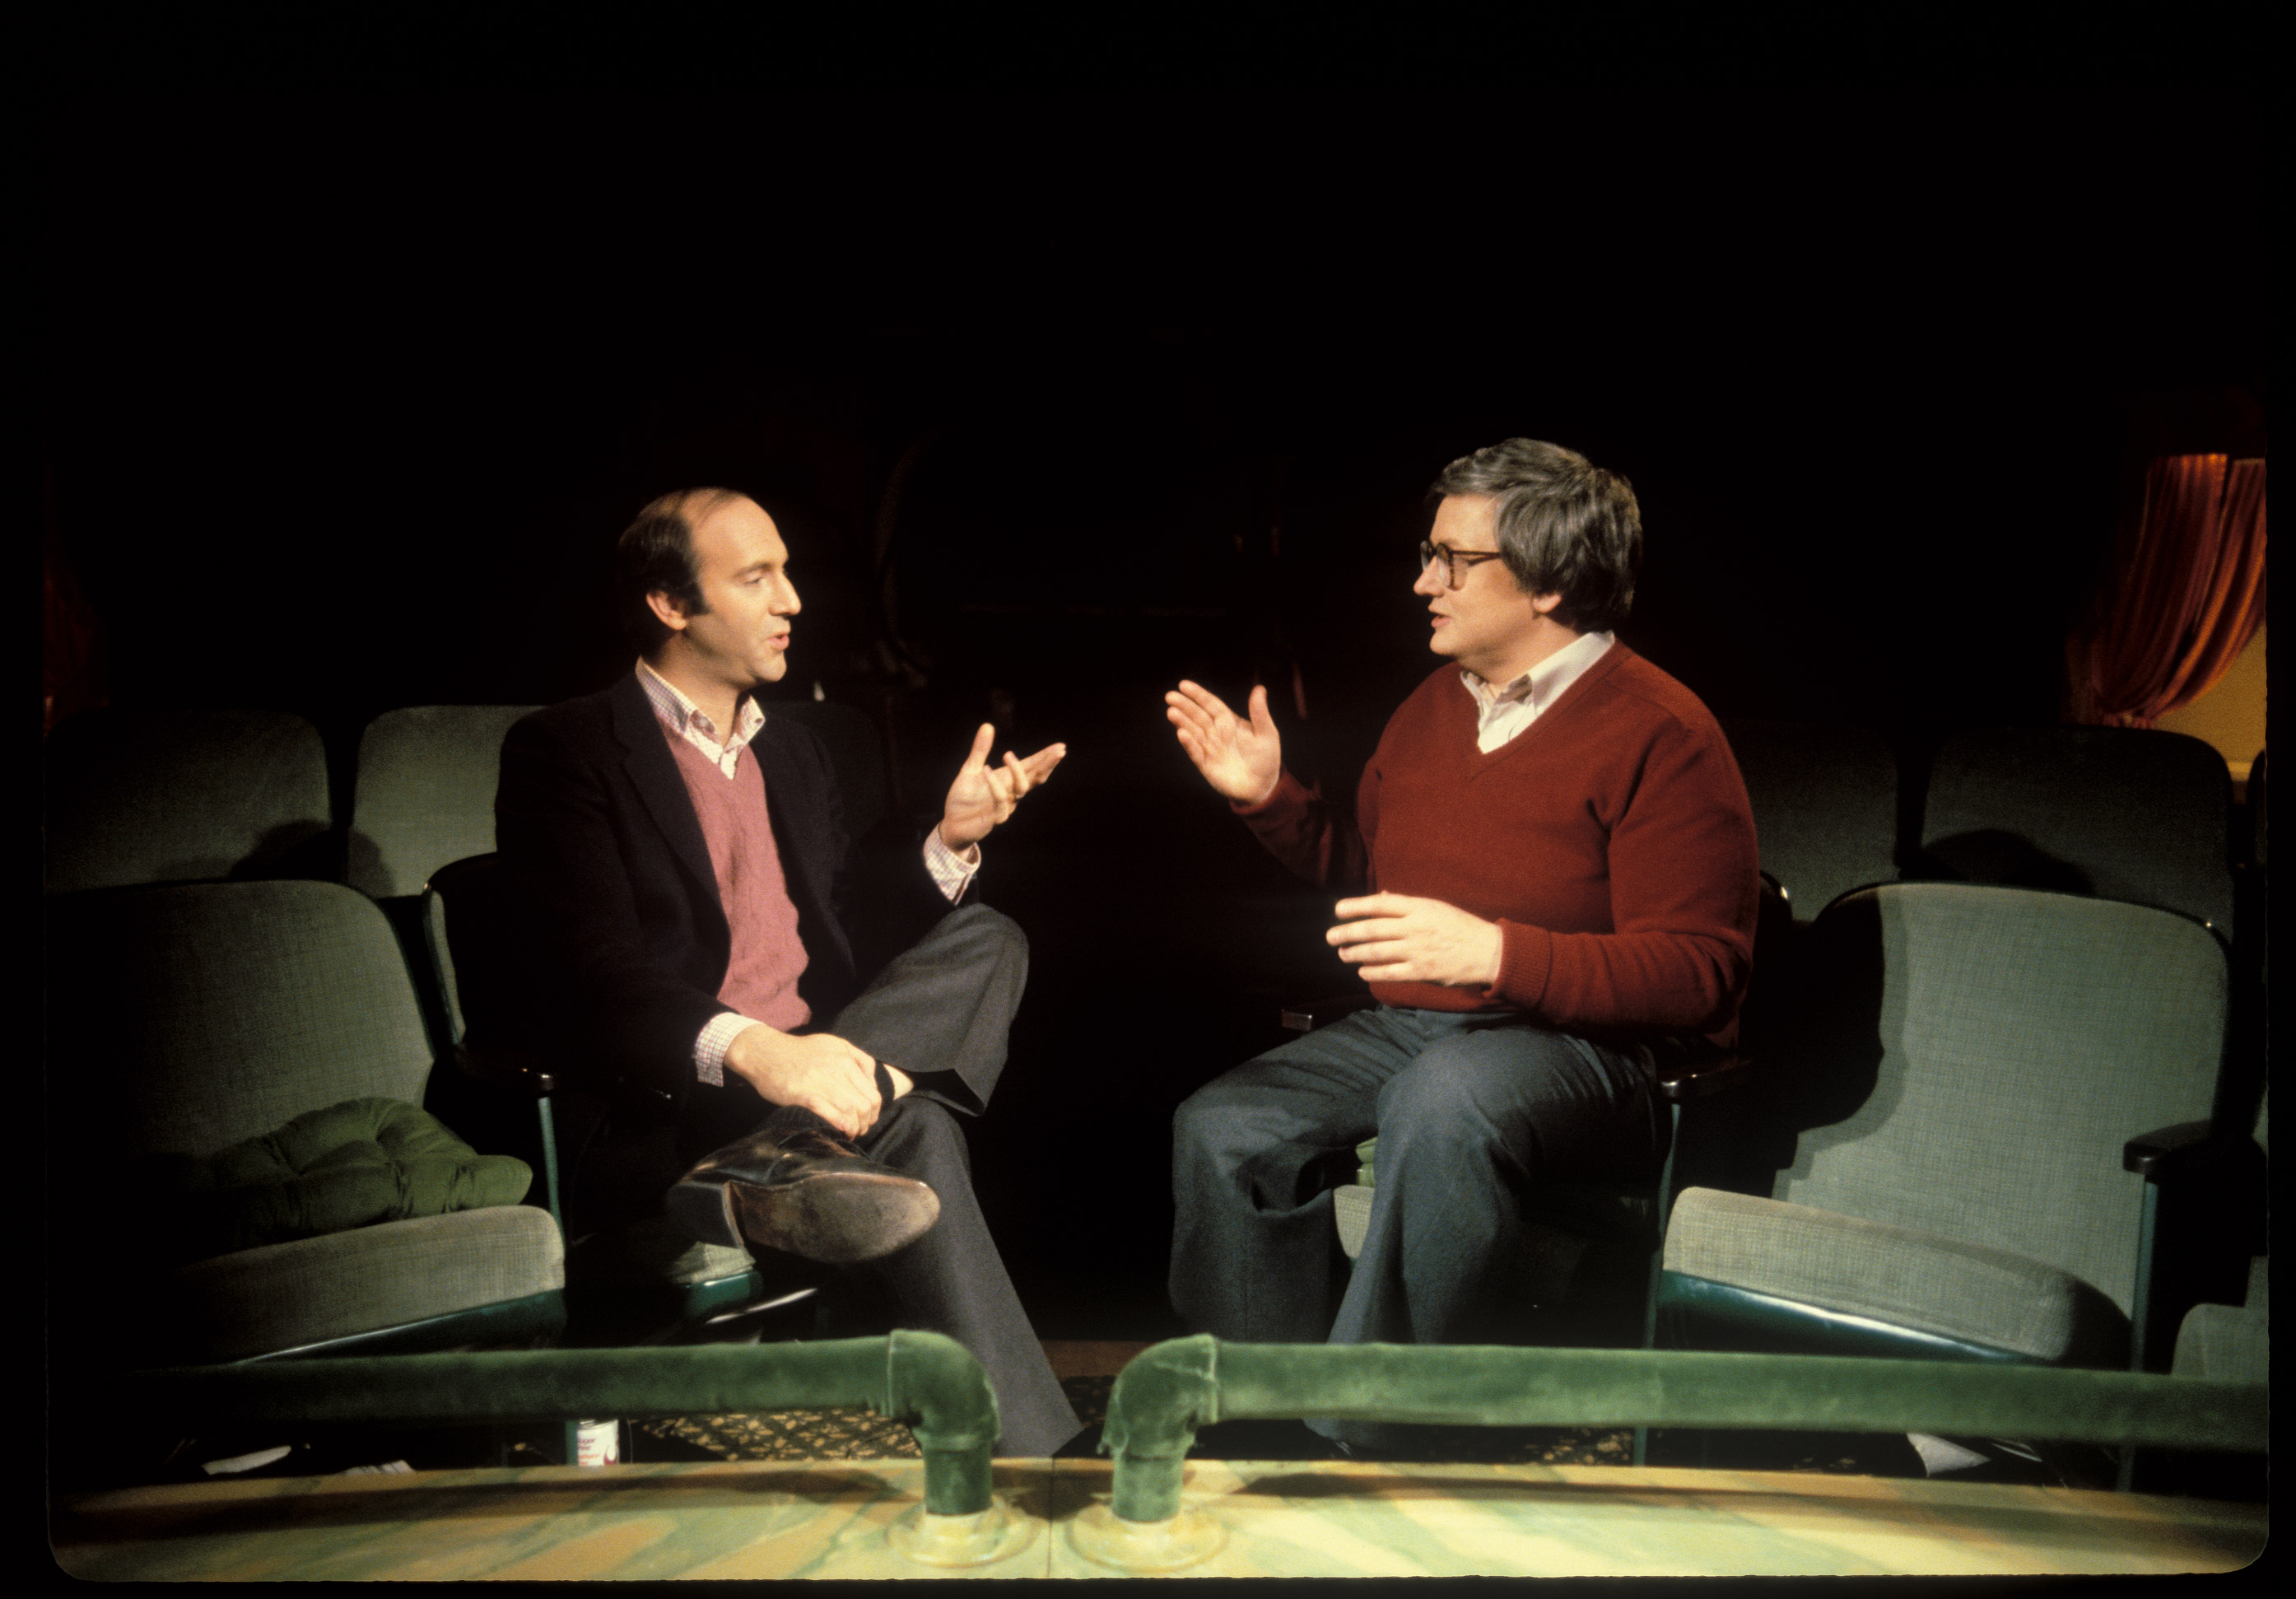 Siskel (left) and Ebert locked in one of their classic arguments.